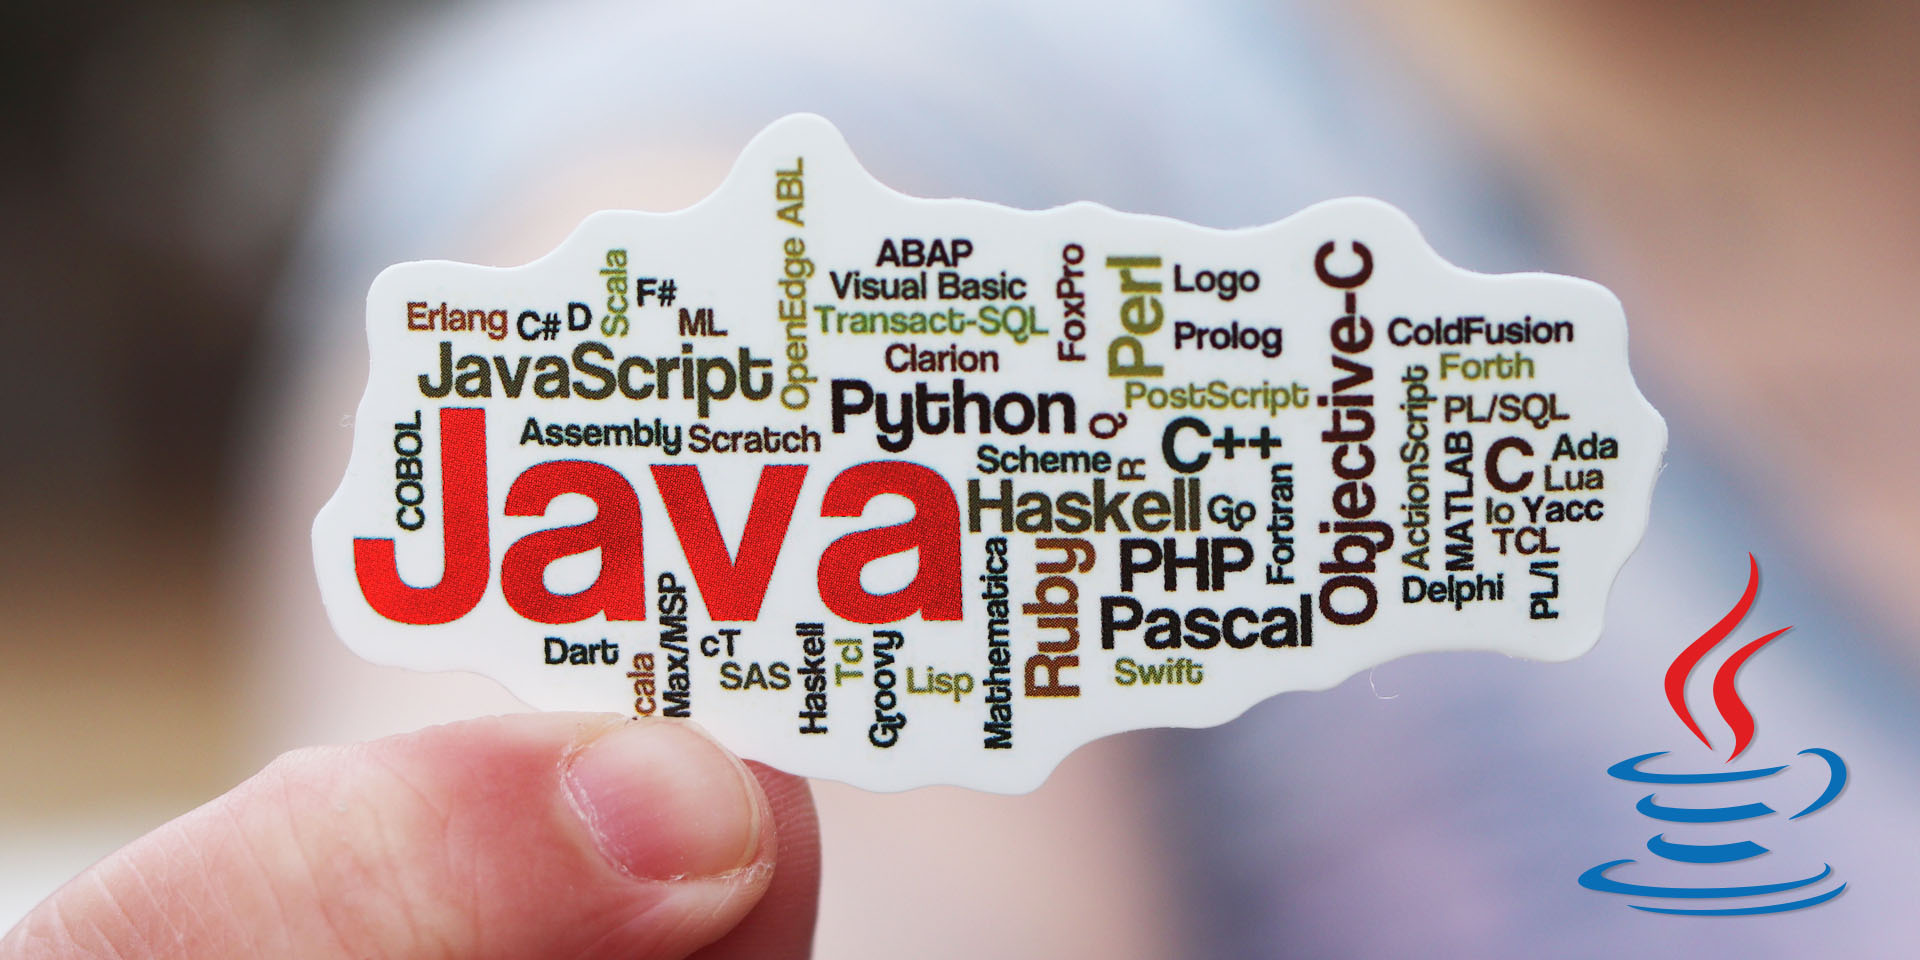 Java offers significant advantages over other programming languages and environments, making it suitable for virtually any programming task.